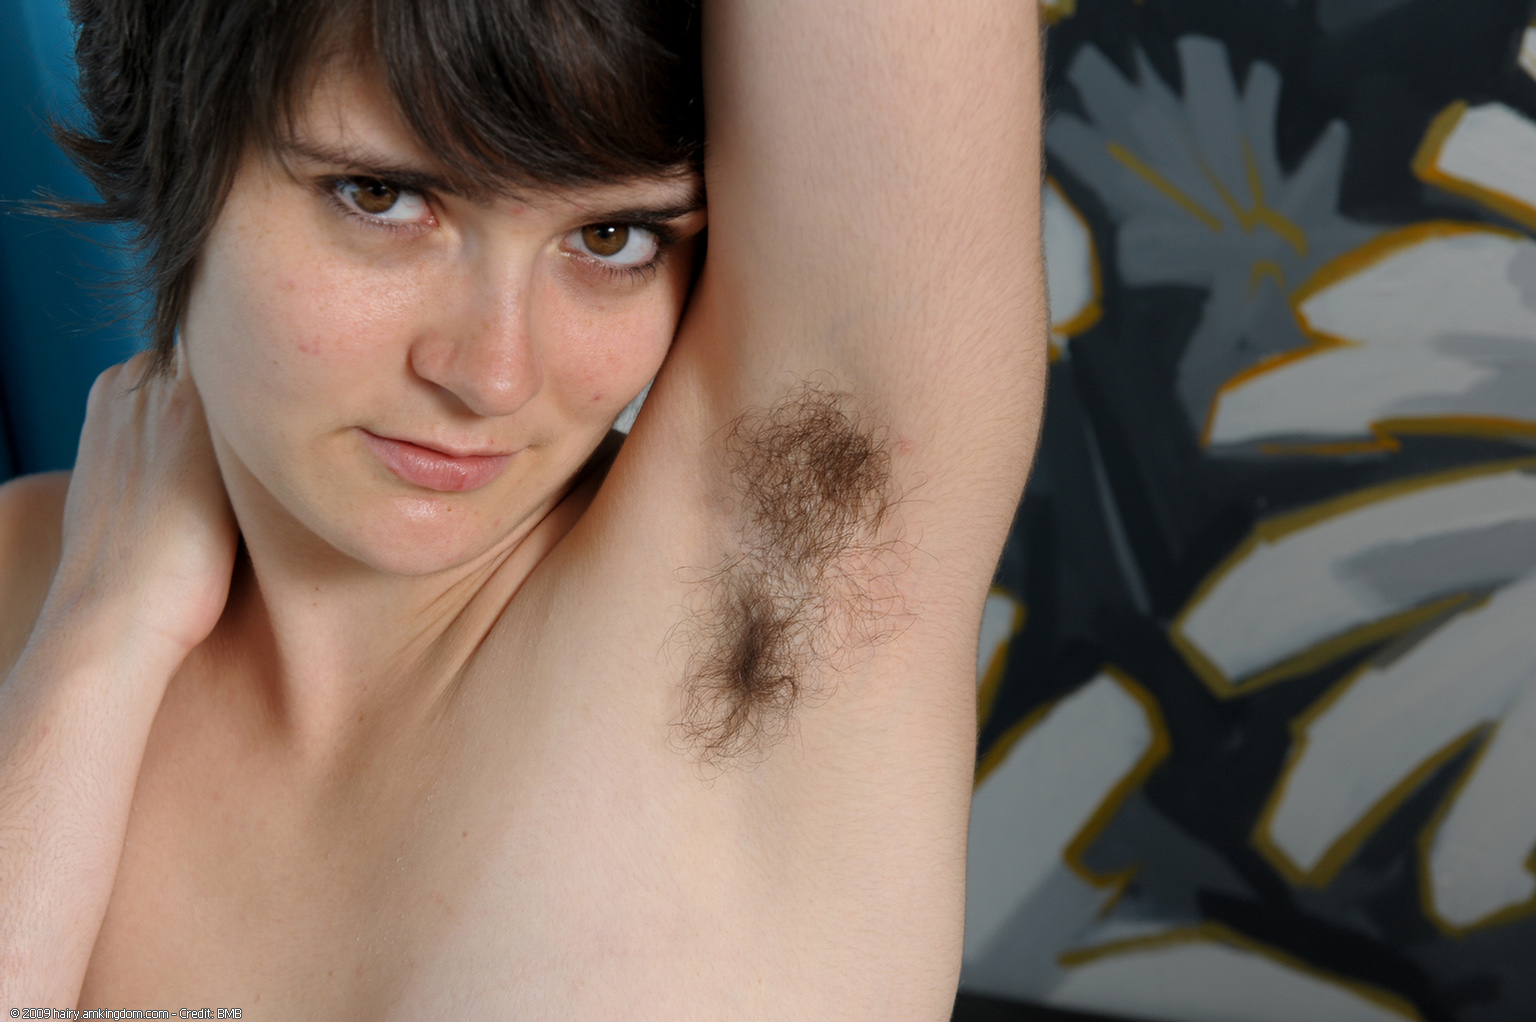 Sally Atk Natural Hairy « ATK Natural And Hairy « Free ATK Pictures @ Bravo ATK